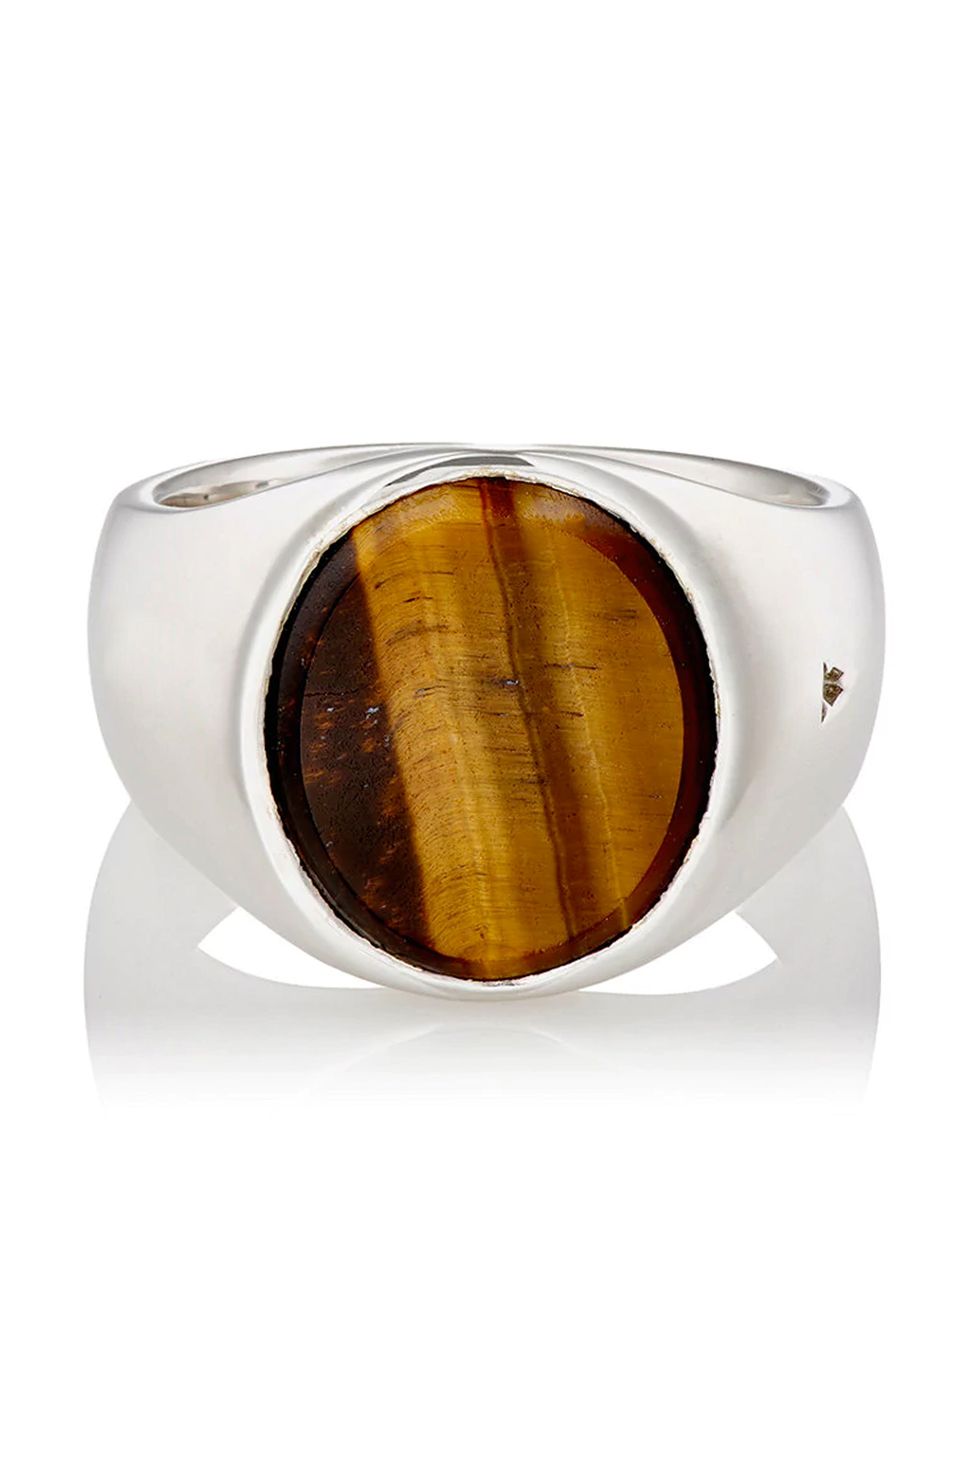 Ring, Amber, Fashion accessory, Brown, Jewellery, Amber, Gemstone, Silver, Bracelet, Metal, 